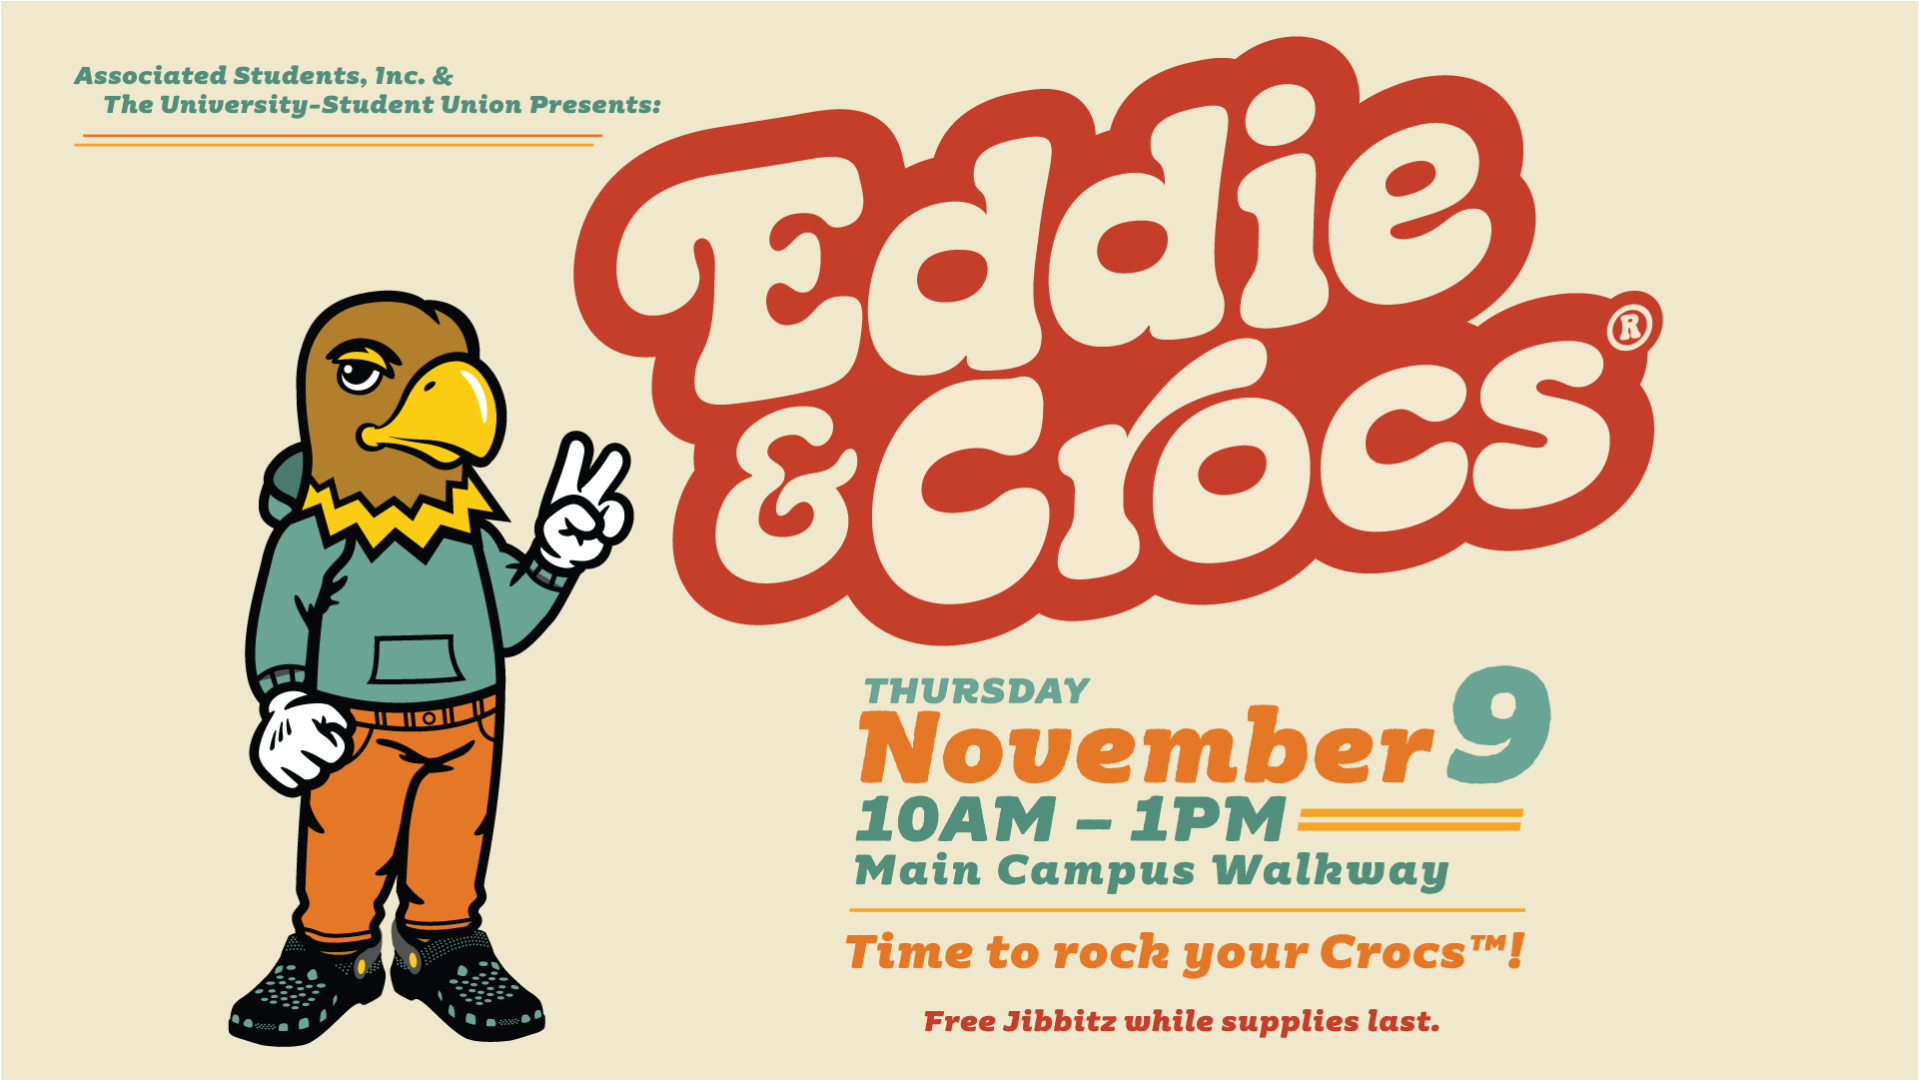 Eddie and Crocs image with eddie the eagle with crocs for november 9 at 10 am